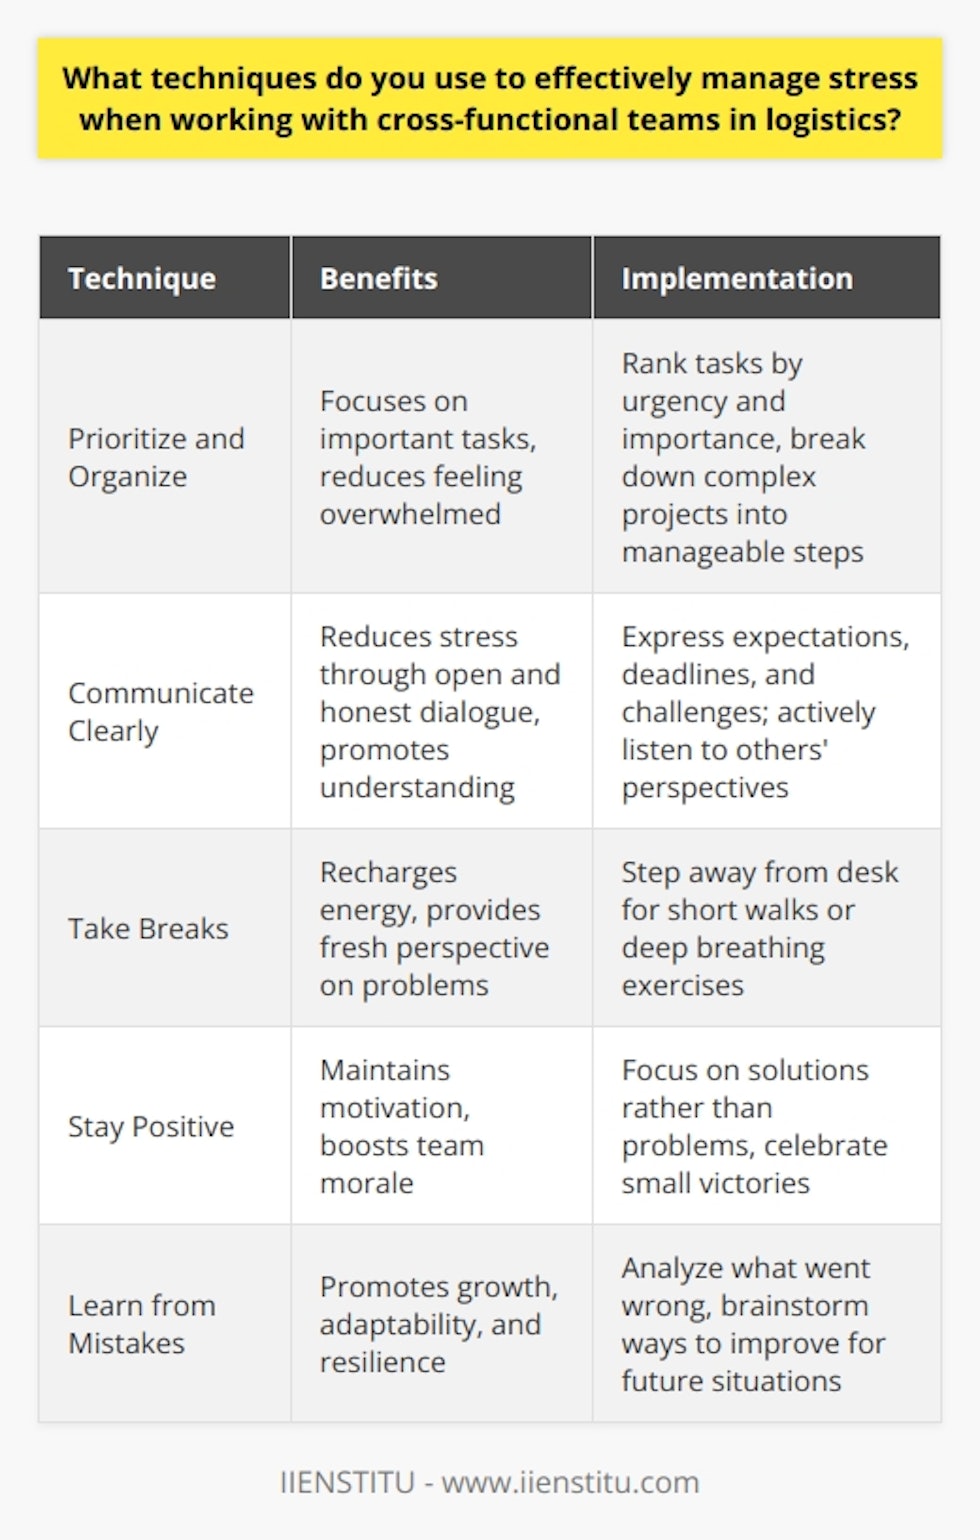 When working with cross-functional teams in logistics, I use several techniques to effectively manage stress: Prioritize and Organize I start by prioritizing tasks based on urgency and importance. This helps me focus on what matters most. I also break down complex projects into smaller, manageable steps to avoid feeling overwhelmed. Communicate Clearly Clear communication is key to reducing stress when collaborating with diverse teams. I make sure to express my expectations, deadlines, and challenges openly and honestly. Active listening helps me understand others perspectives and find common ground. Take Breaks When stress levels rise, I step away from my desk for a few minutes. A quick walk or some deep breathing exercises can work wonders. These short breaks help me recharge and approach problems with a fresh mindset. Stay Positive I try to maintain a positive attitude, even in challenging situations. Focusing on solutions rather than dwelling on problems keeps me motivated. Celebrating small victories along the way boosts morale for the entire team. Learn from Mistakes I view mistakes as opportunities for growth and learning. Instead of getting frustrated, I analyze what went wrong and brainstorm ways to improve. This mindset helps me stay resilient and adaptable in the face of stress. By using these techniques consistently, Im able to manage stress effectively while collaborating with cross-functional teams. Its an ongoing process, but one that leads to better outcomes and a healthier work environment for everyone involved.